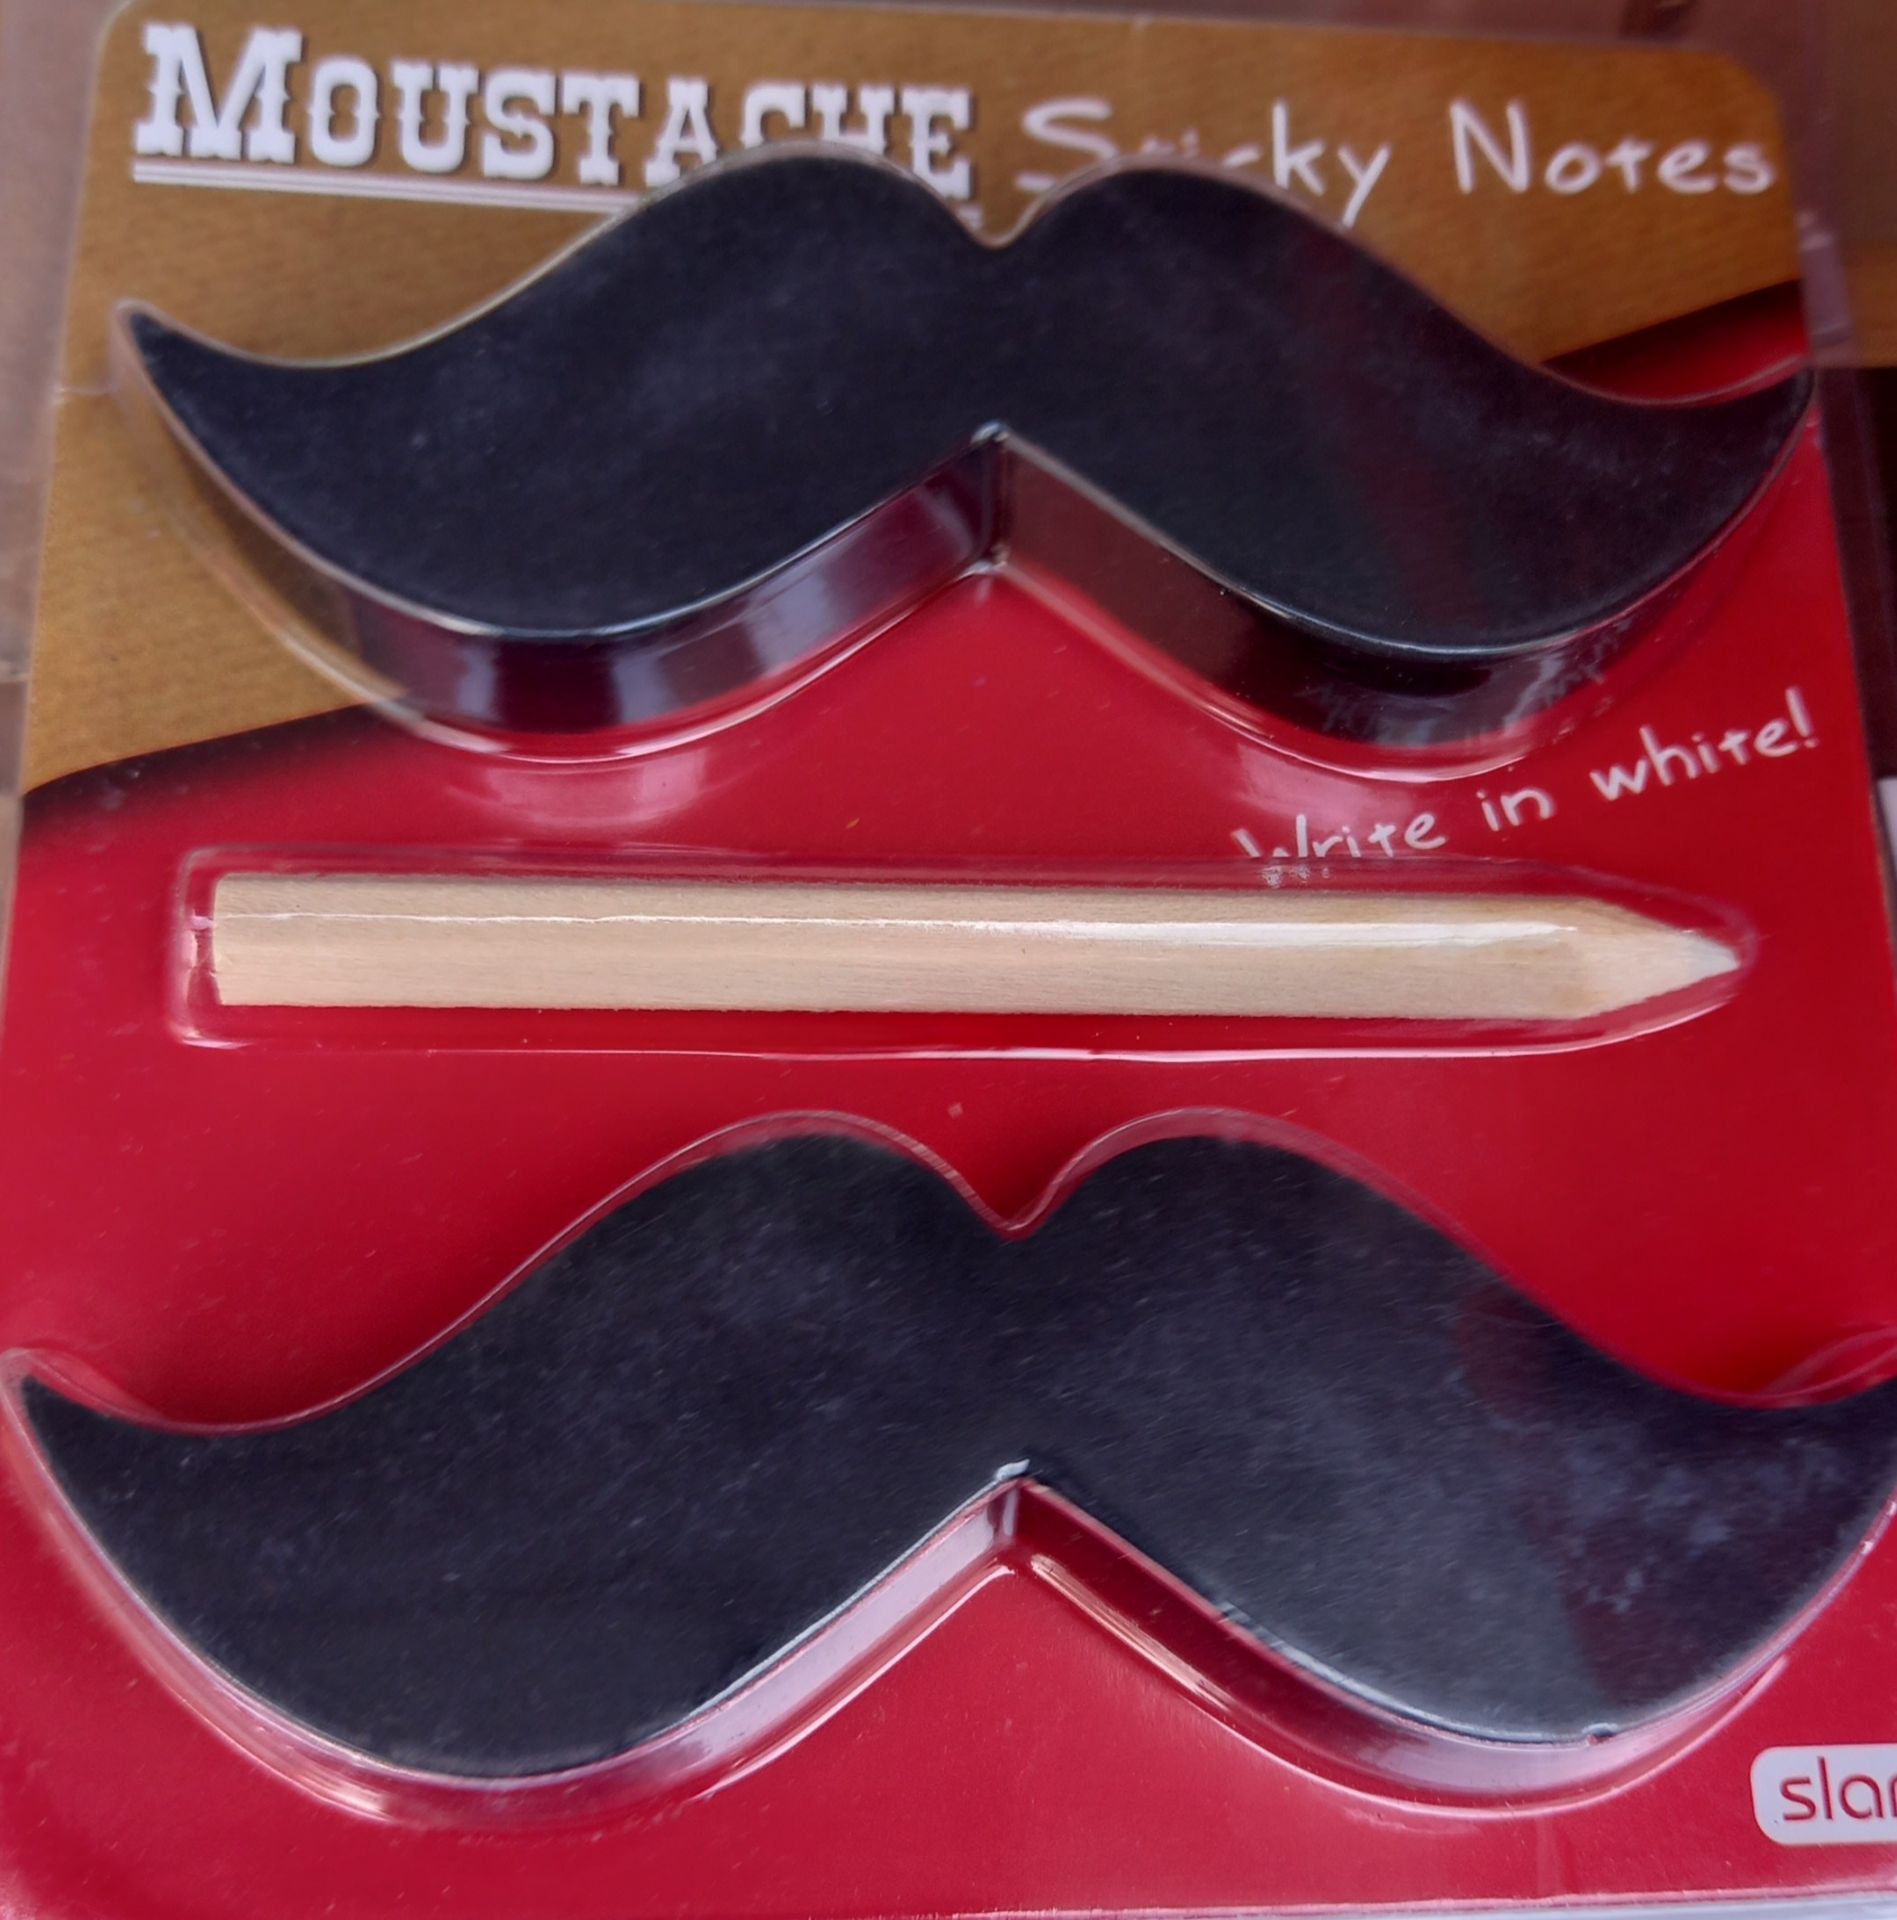 10 brand new moustache shape sticky notes and pencil